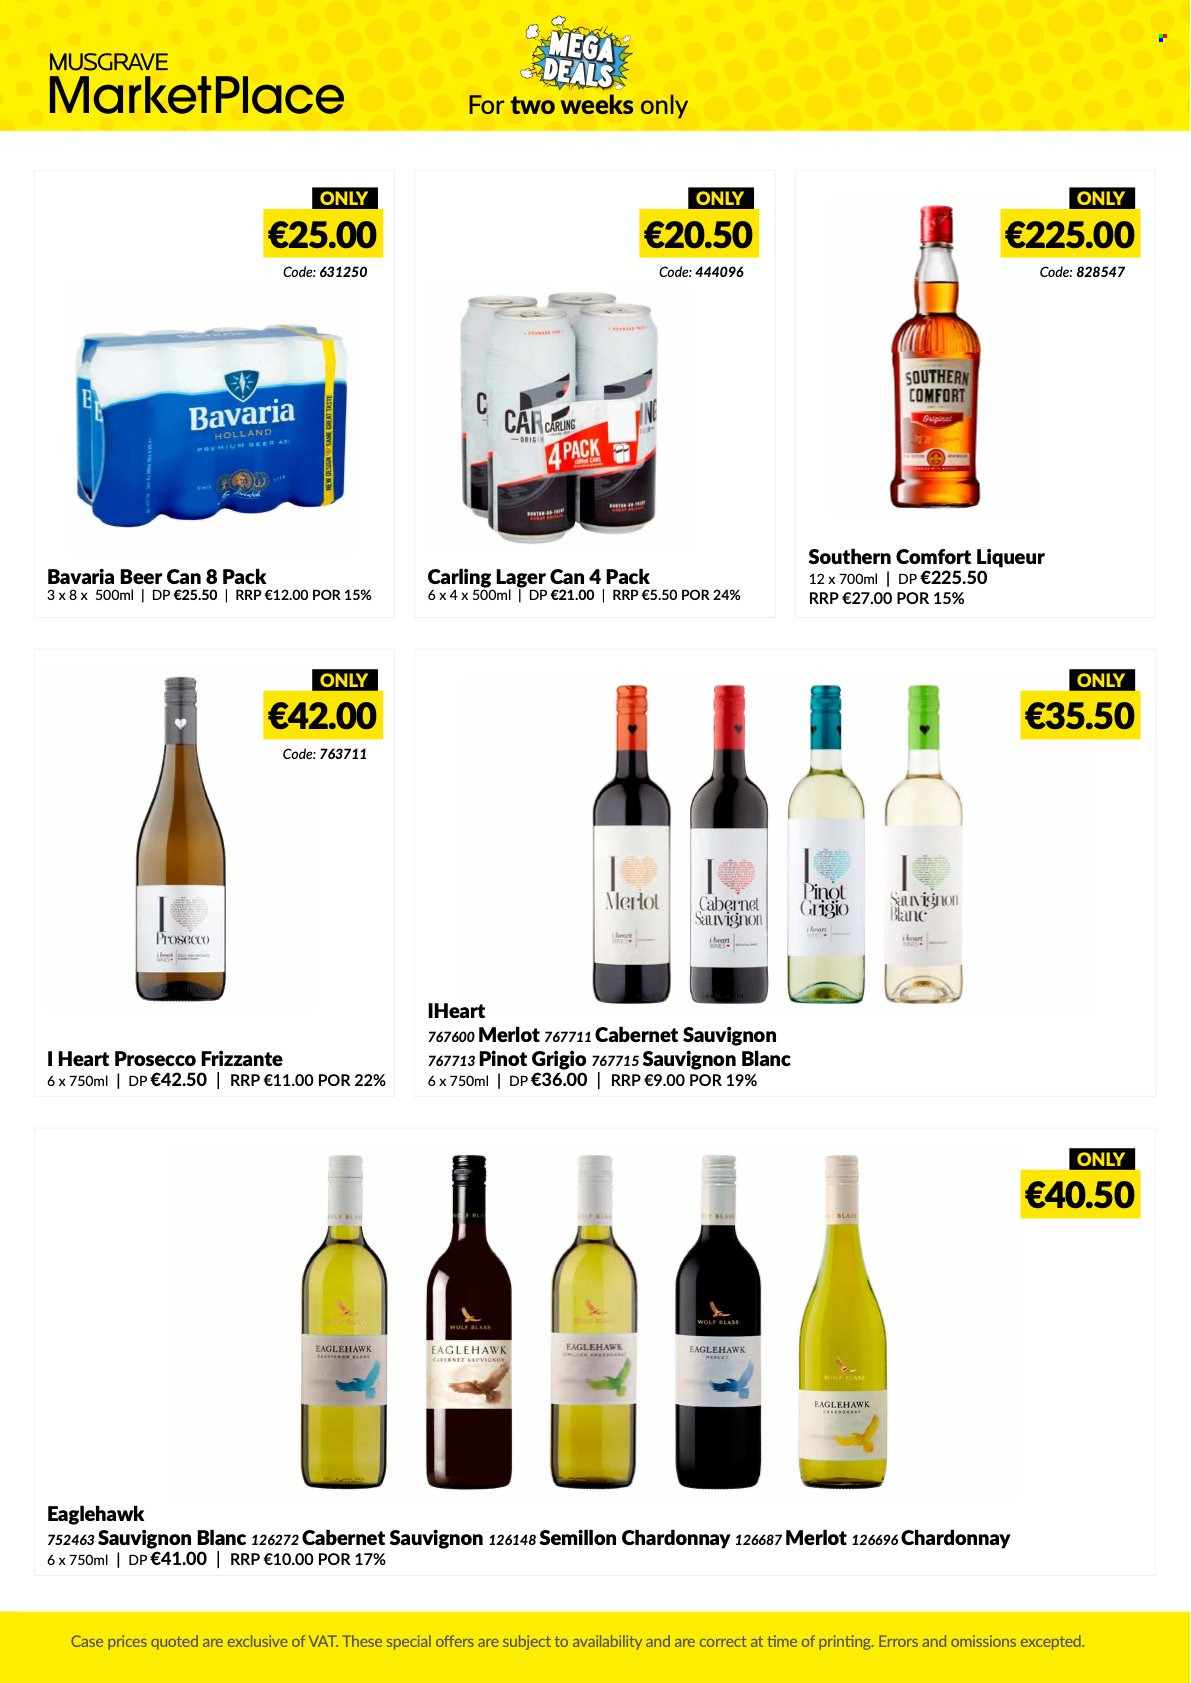 thumbnail - MUSGRAVE Market Place offer  - 21.11.2021 - 04.12.2021 - Sales products - Cabernet Sauvignon, red wine, white wine, prosecco, Chardonnay, wine, Merlot, Pinot Grigio, Sauvignon Blanc, liqueur, beer, Carling, Lager. Page 3.